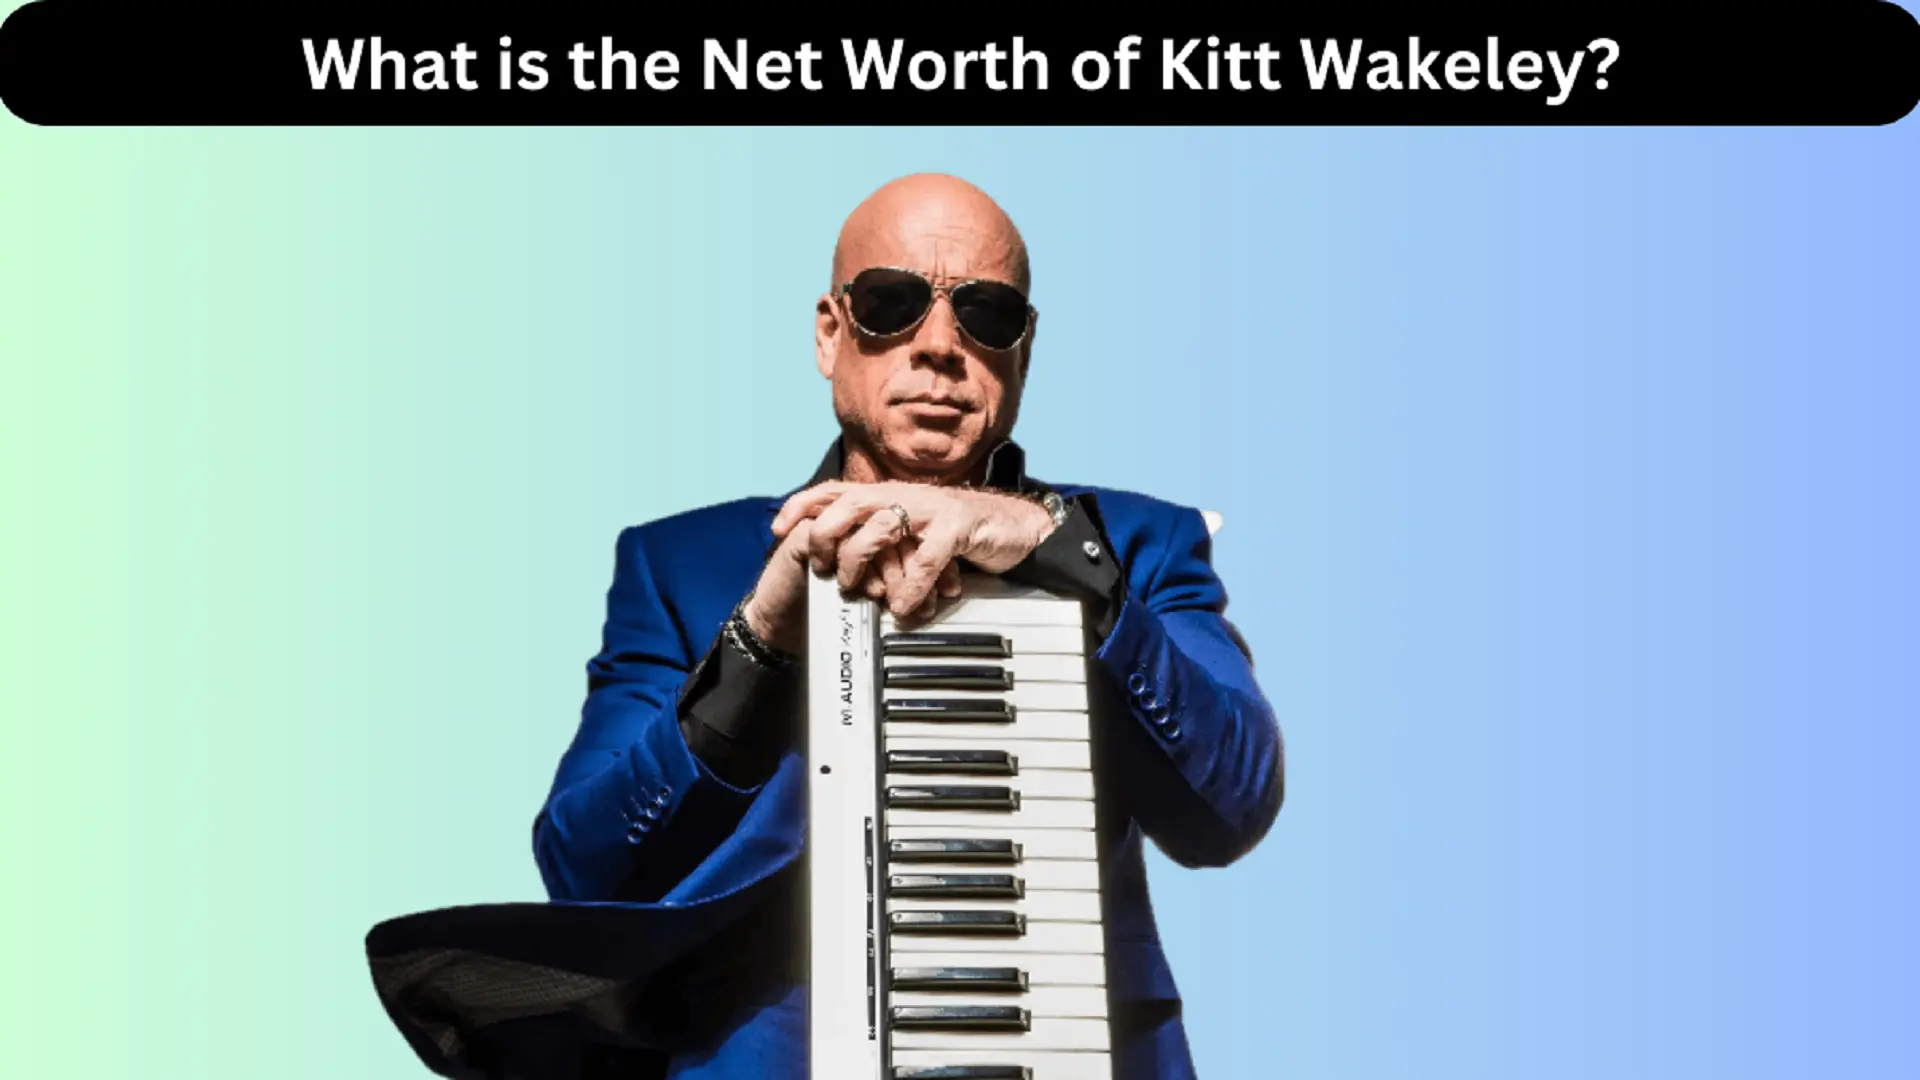 What is the Net Worth of Kitt Wakeley